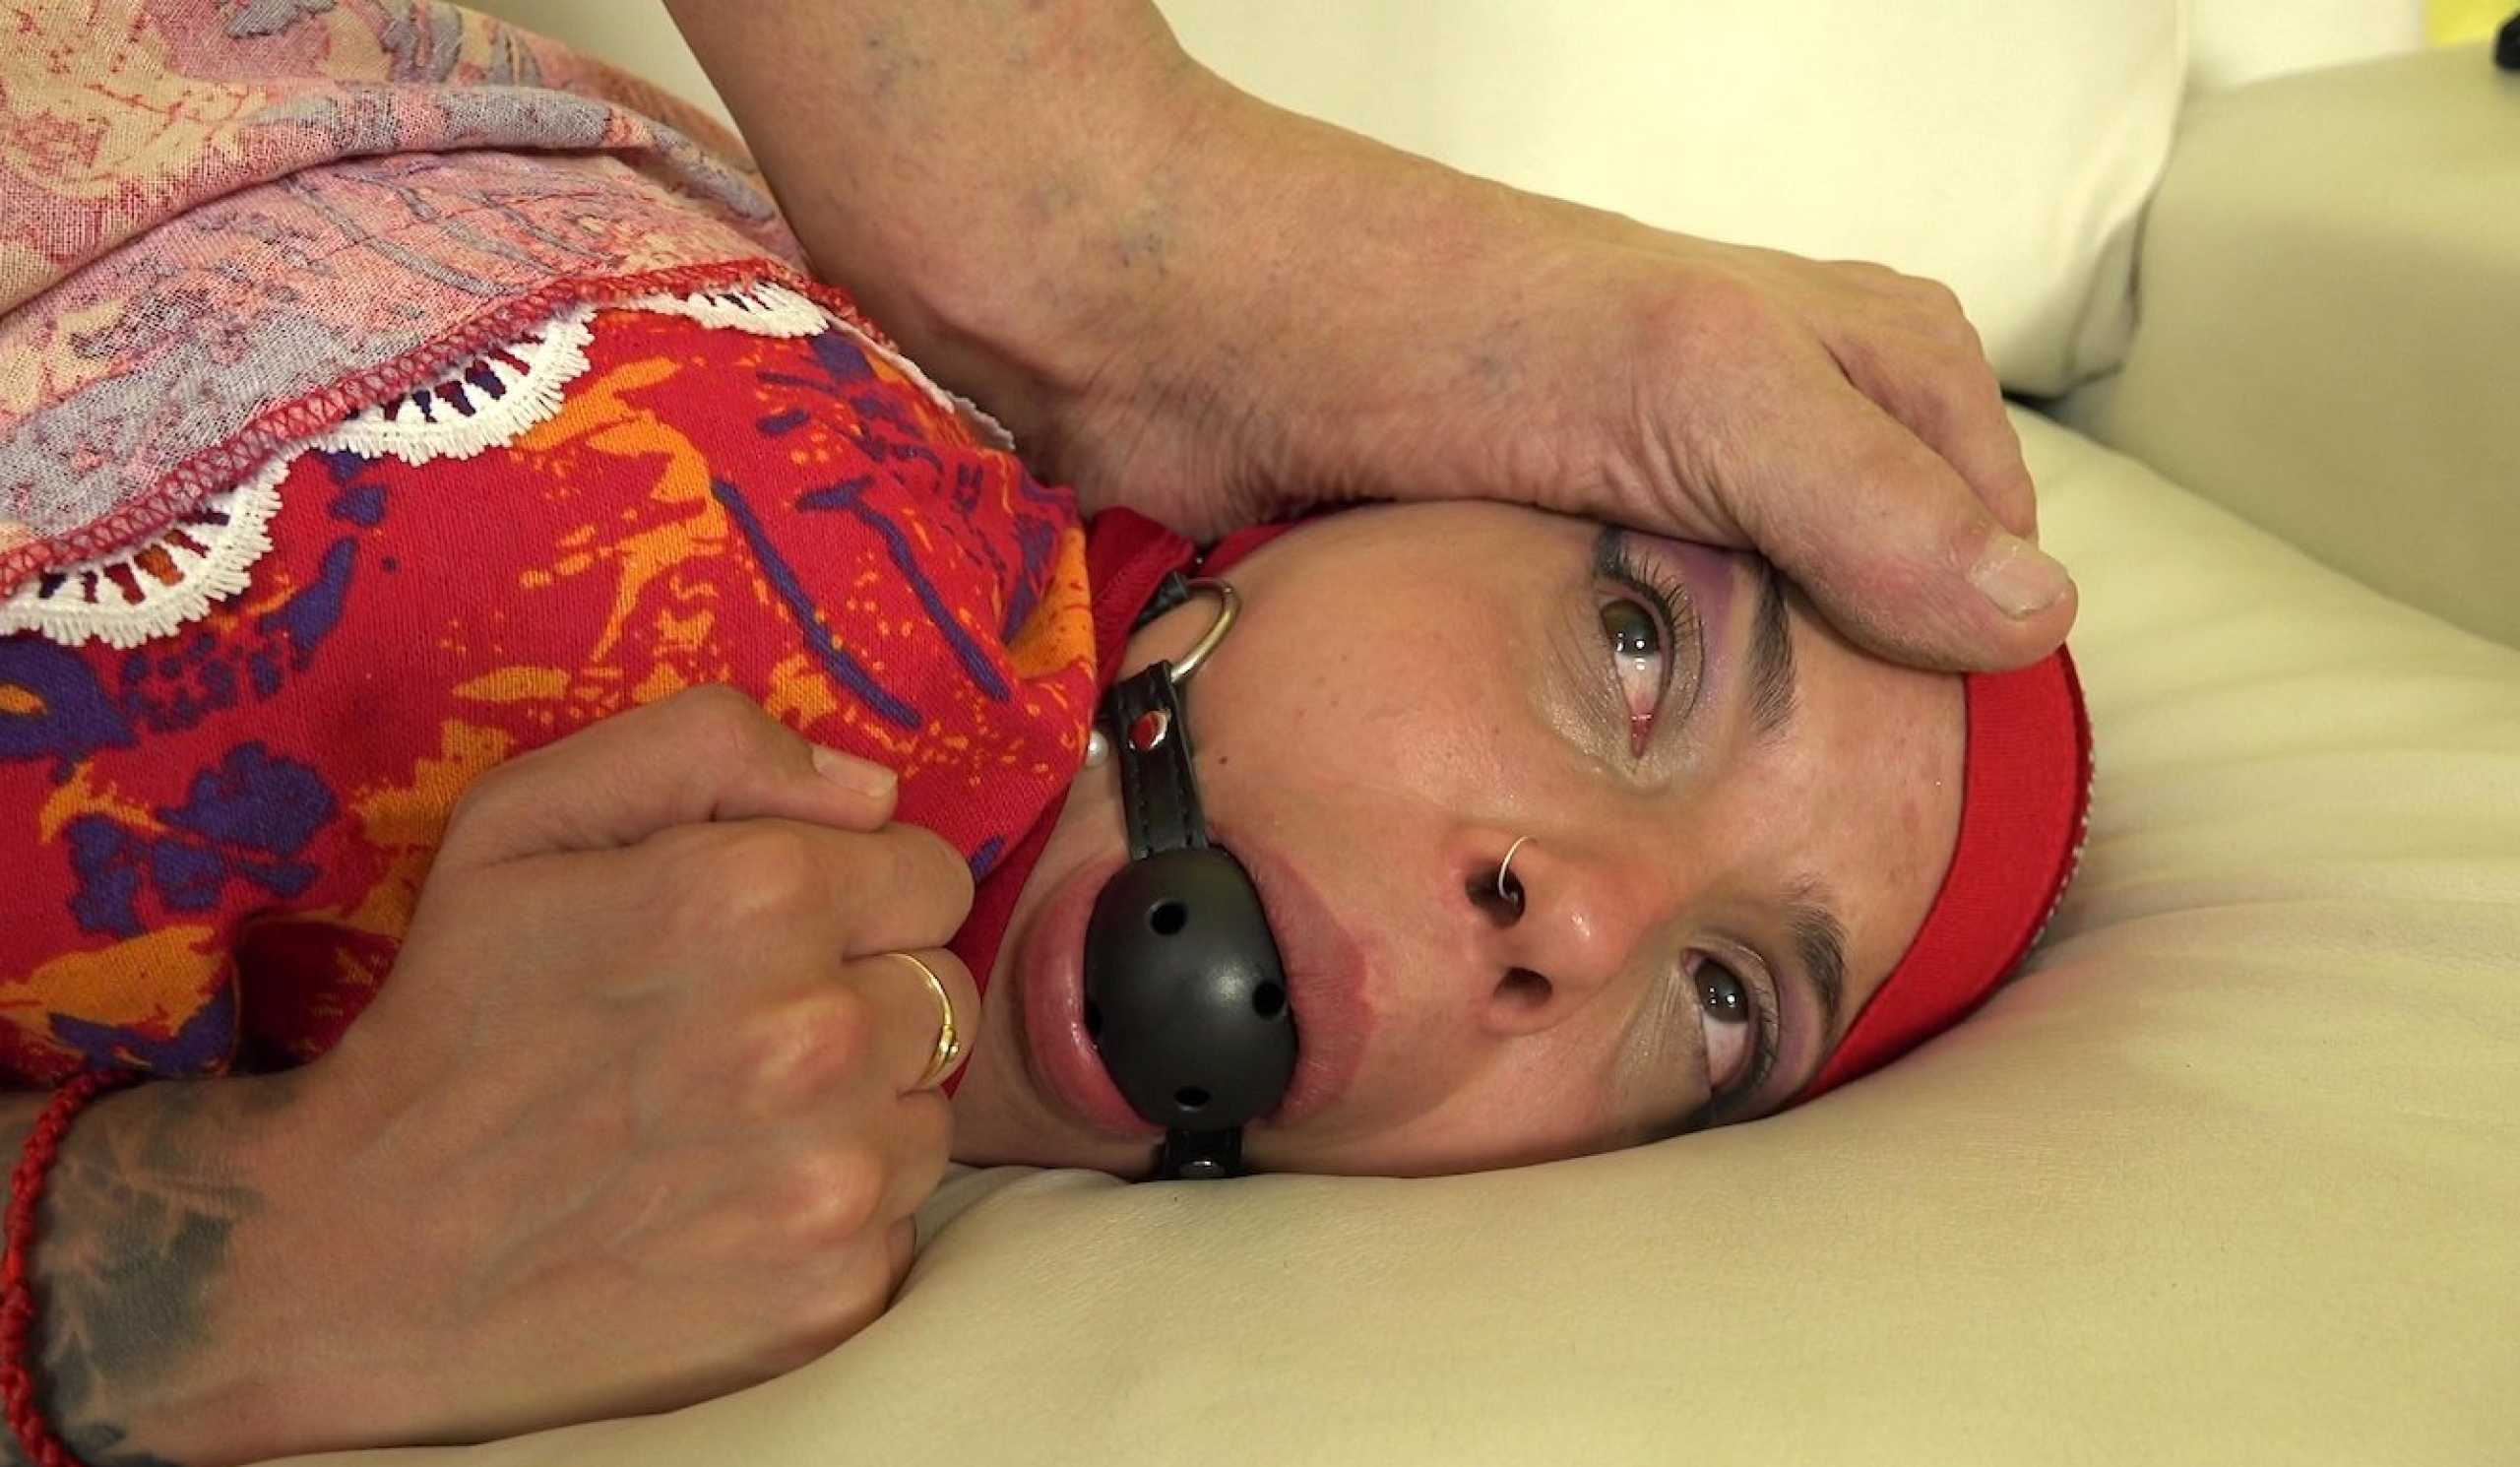 SexWithMuslims &#8211; Emily Addams &#8211; The Woman In The Hijab Was Too Noisy, So She Got Gagged